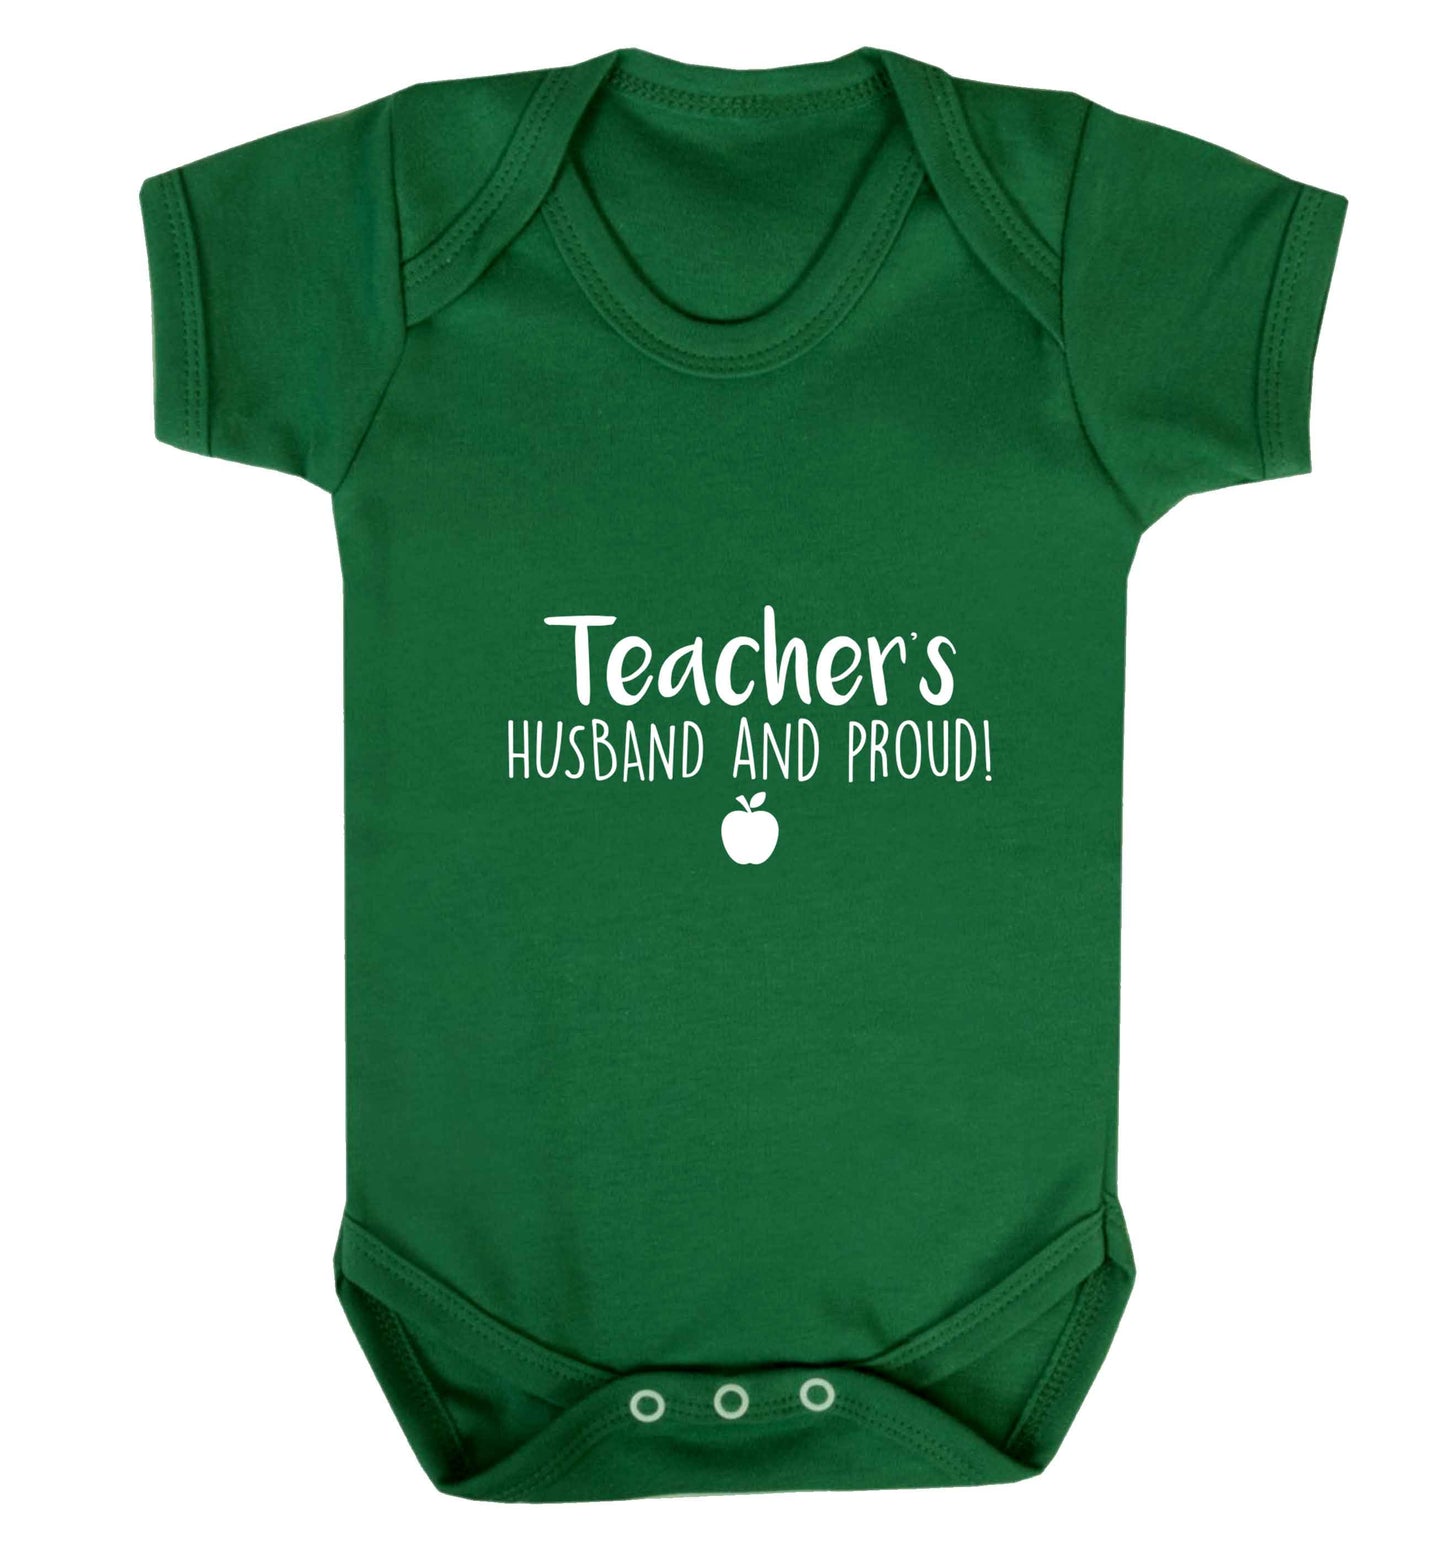 Teachers husband and proud baby vest green 18-24 months